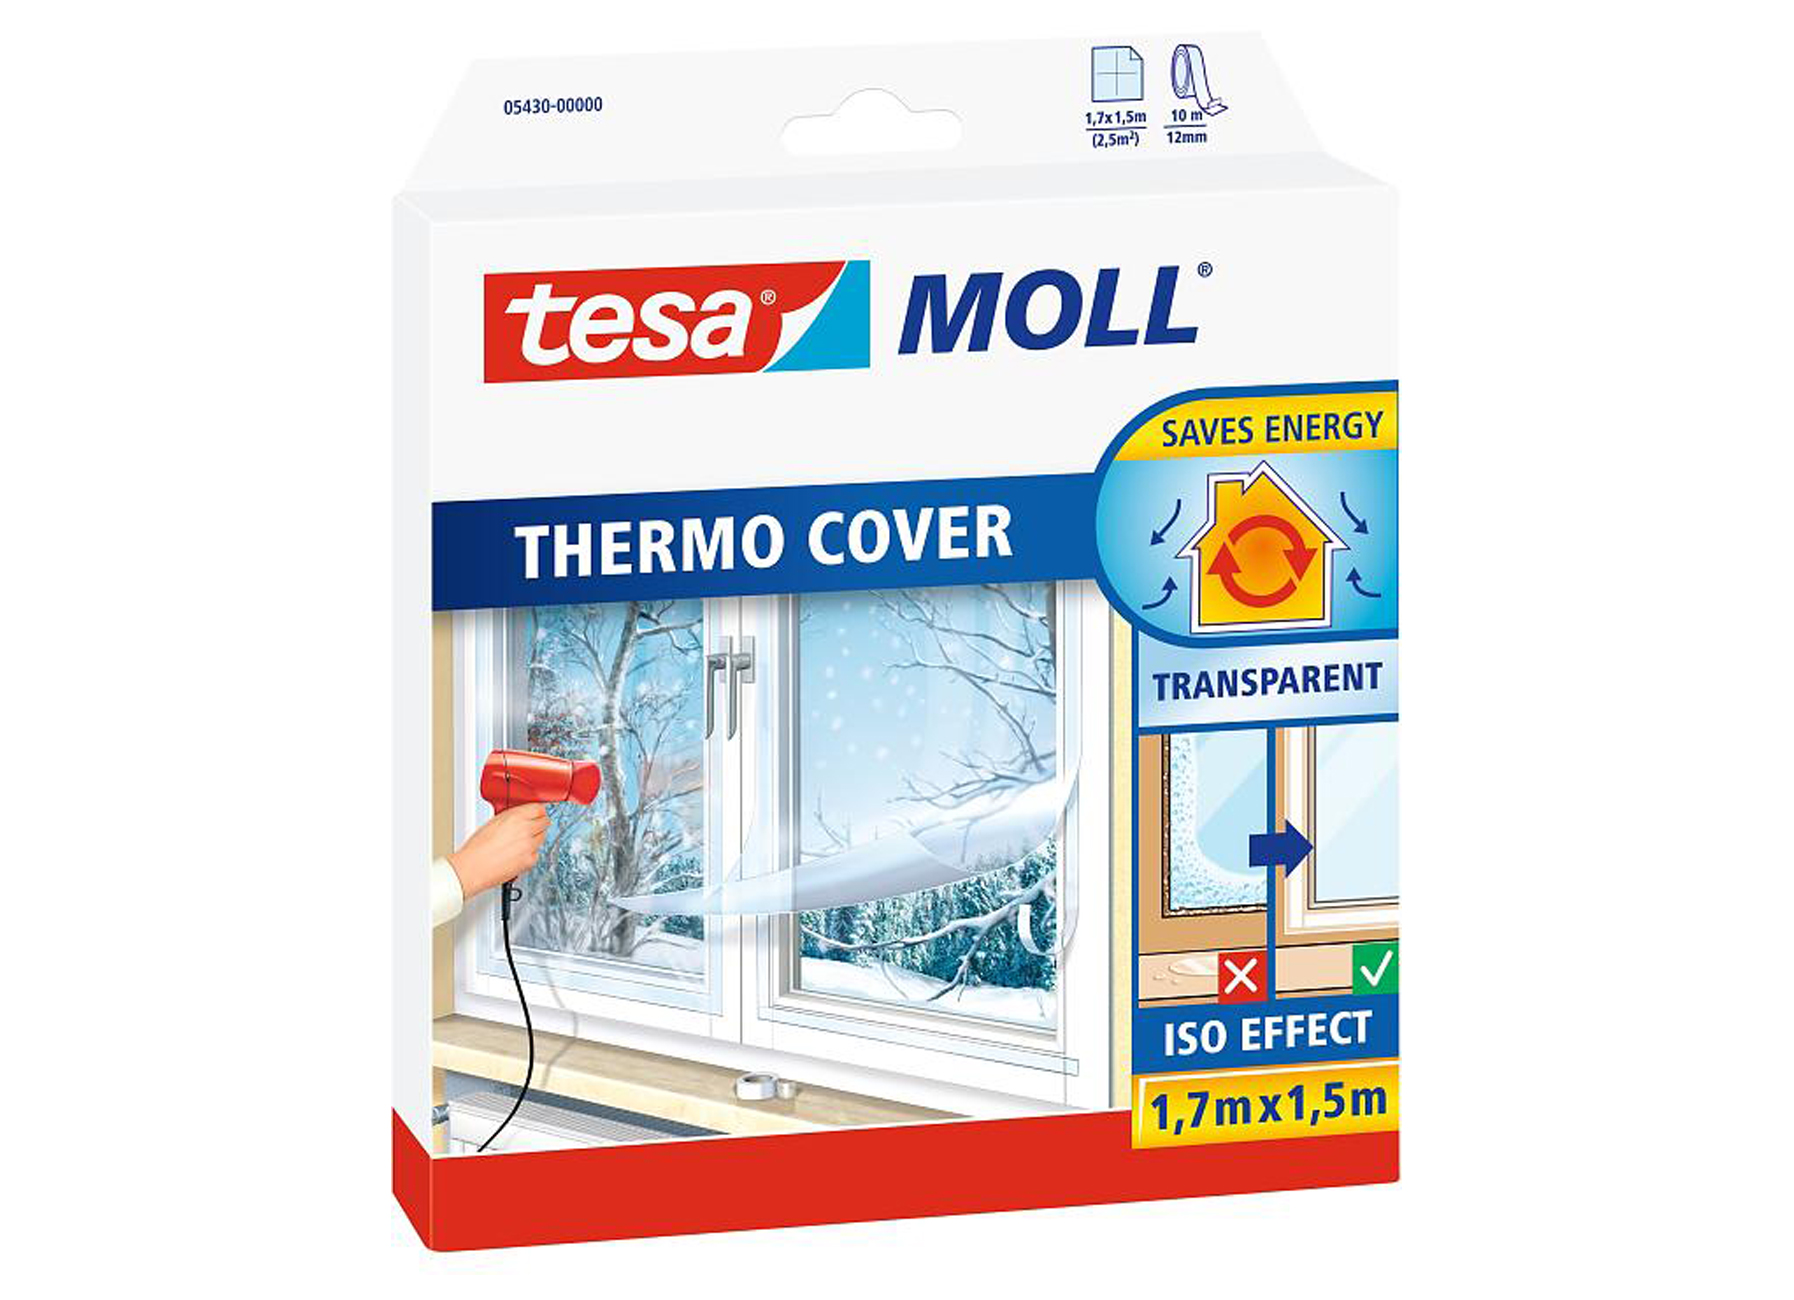 TESAMOLL THERMO COVER 2,55M2